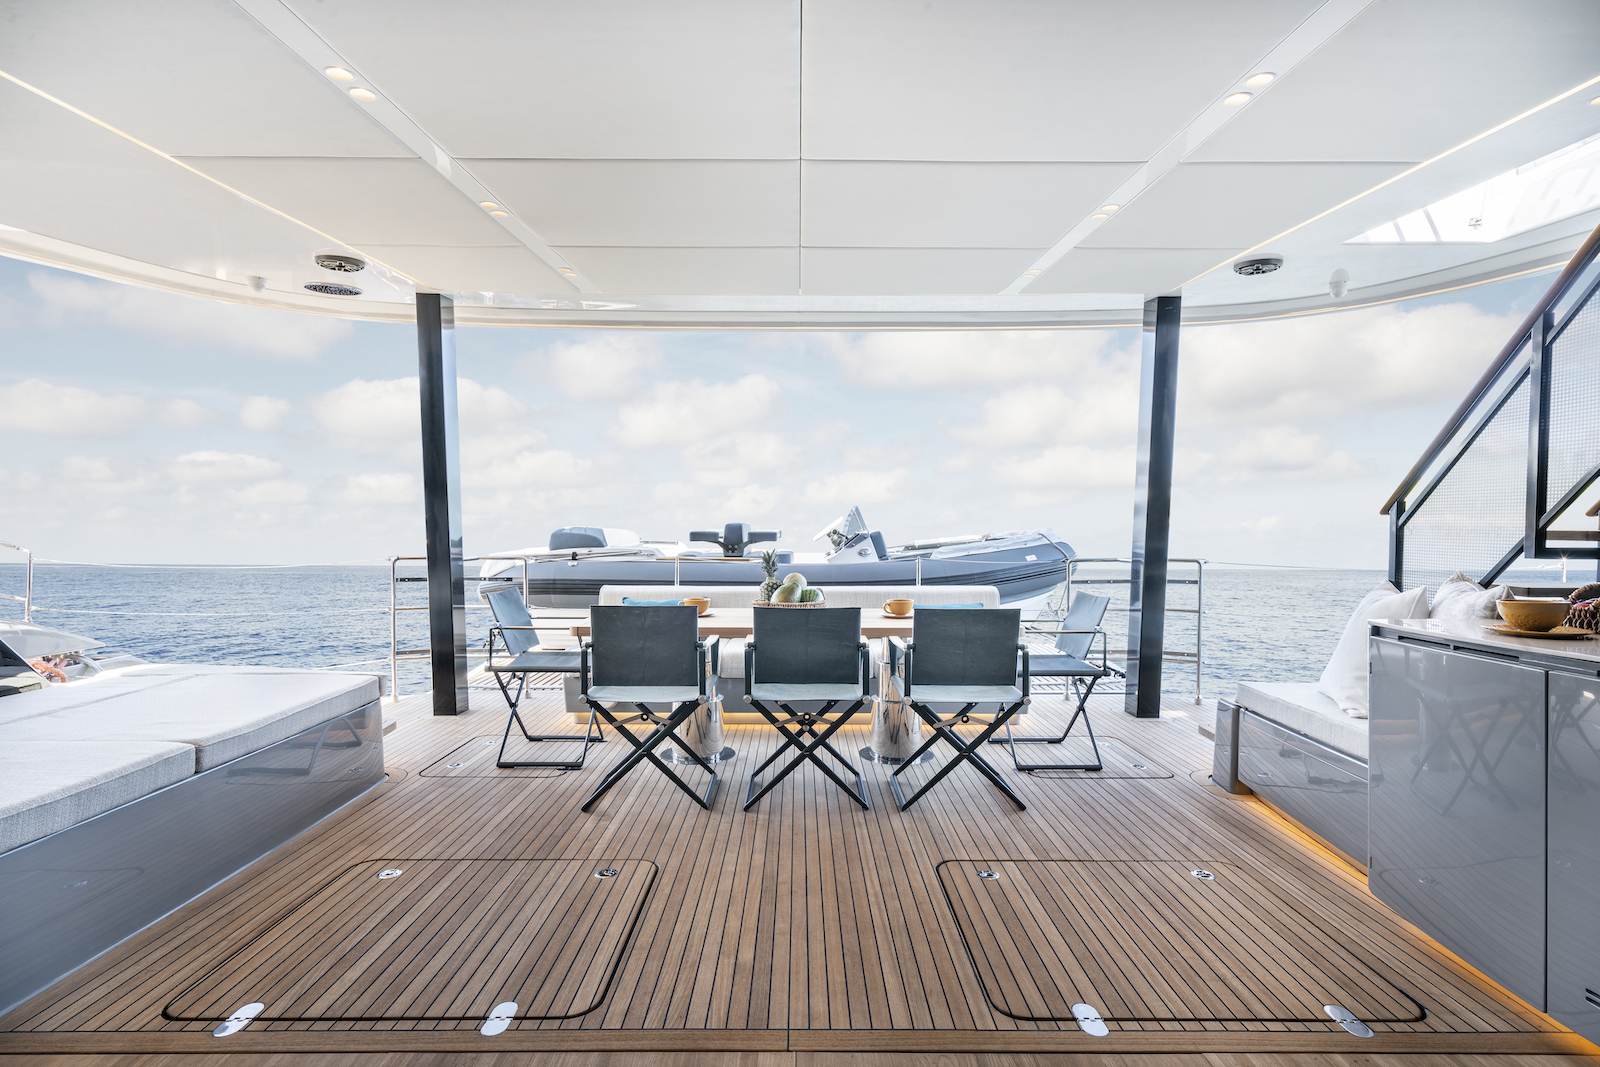 Aft deck views out to the stern